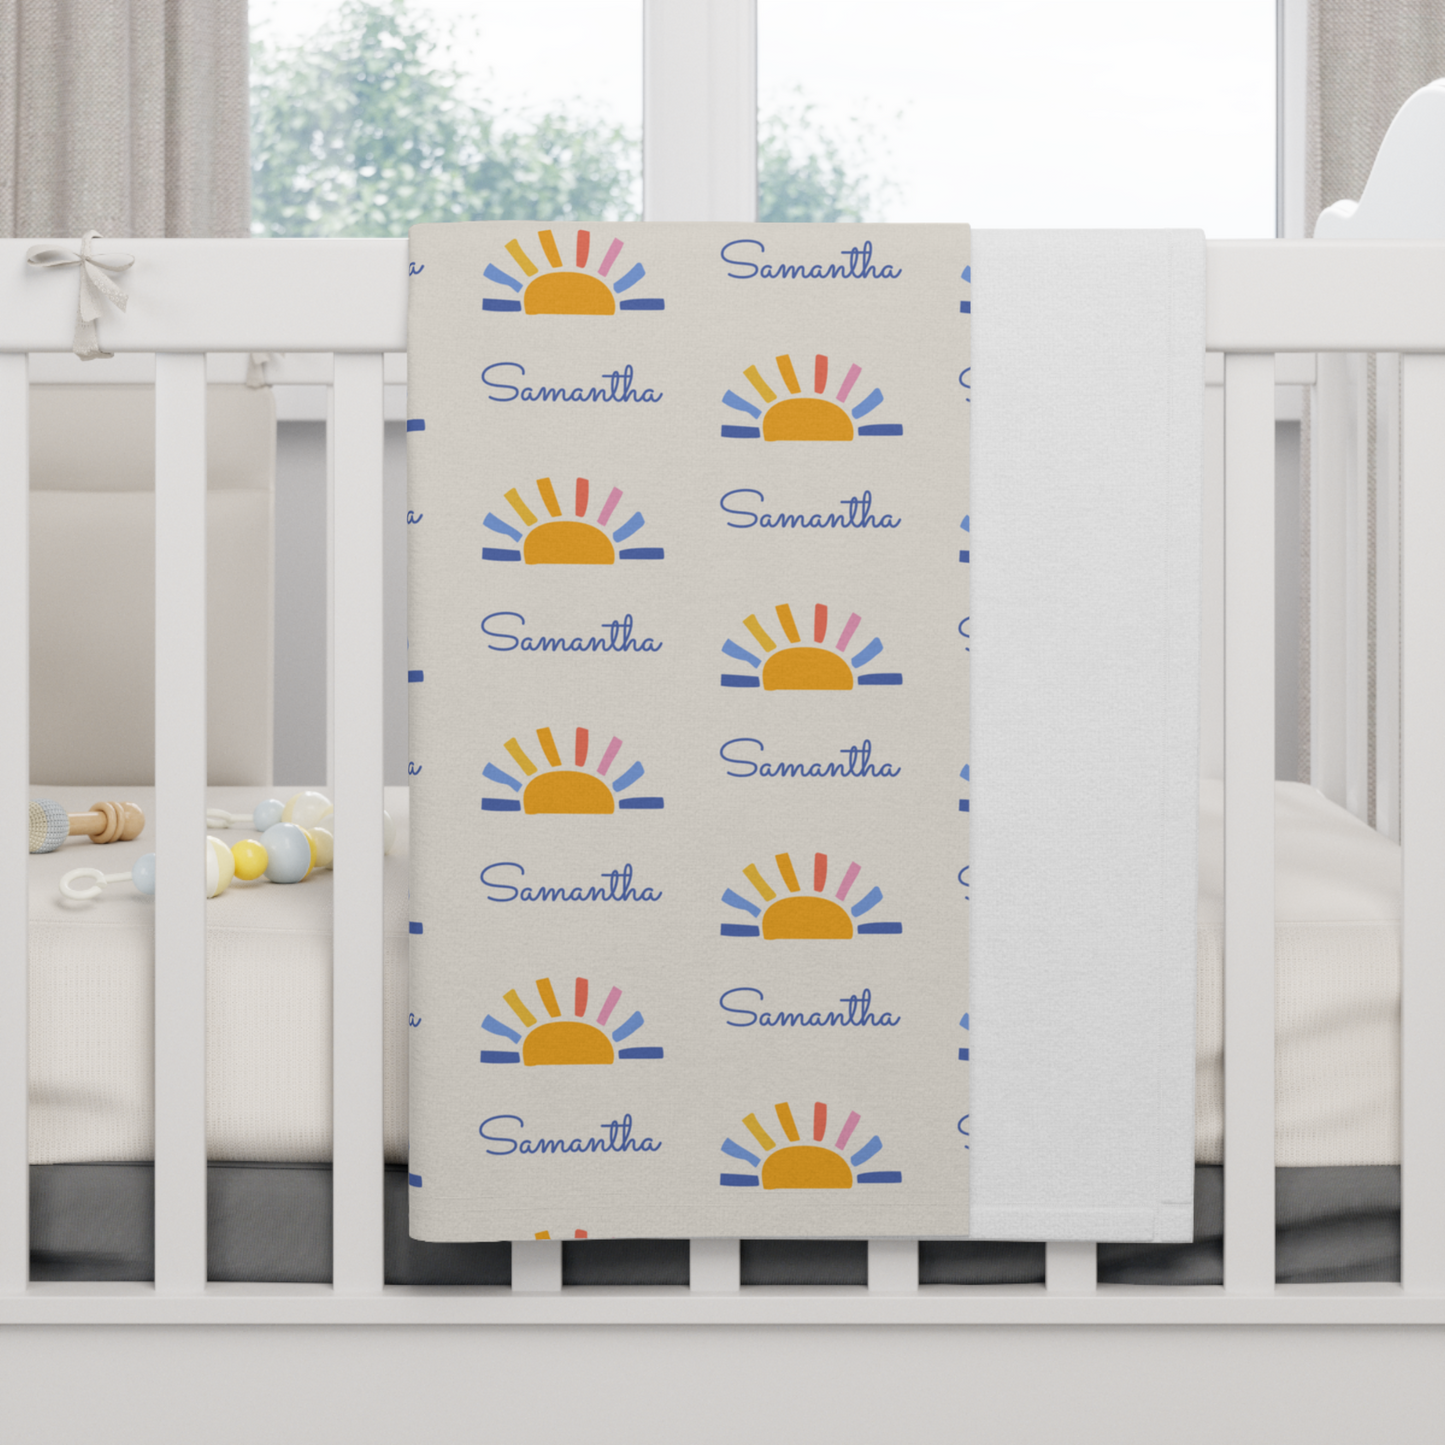 Fleece personalized baby blanket in sun pattern hung over side of white crib with window in the background